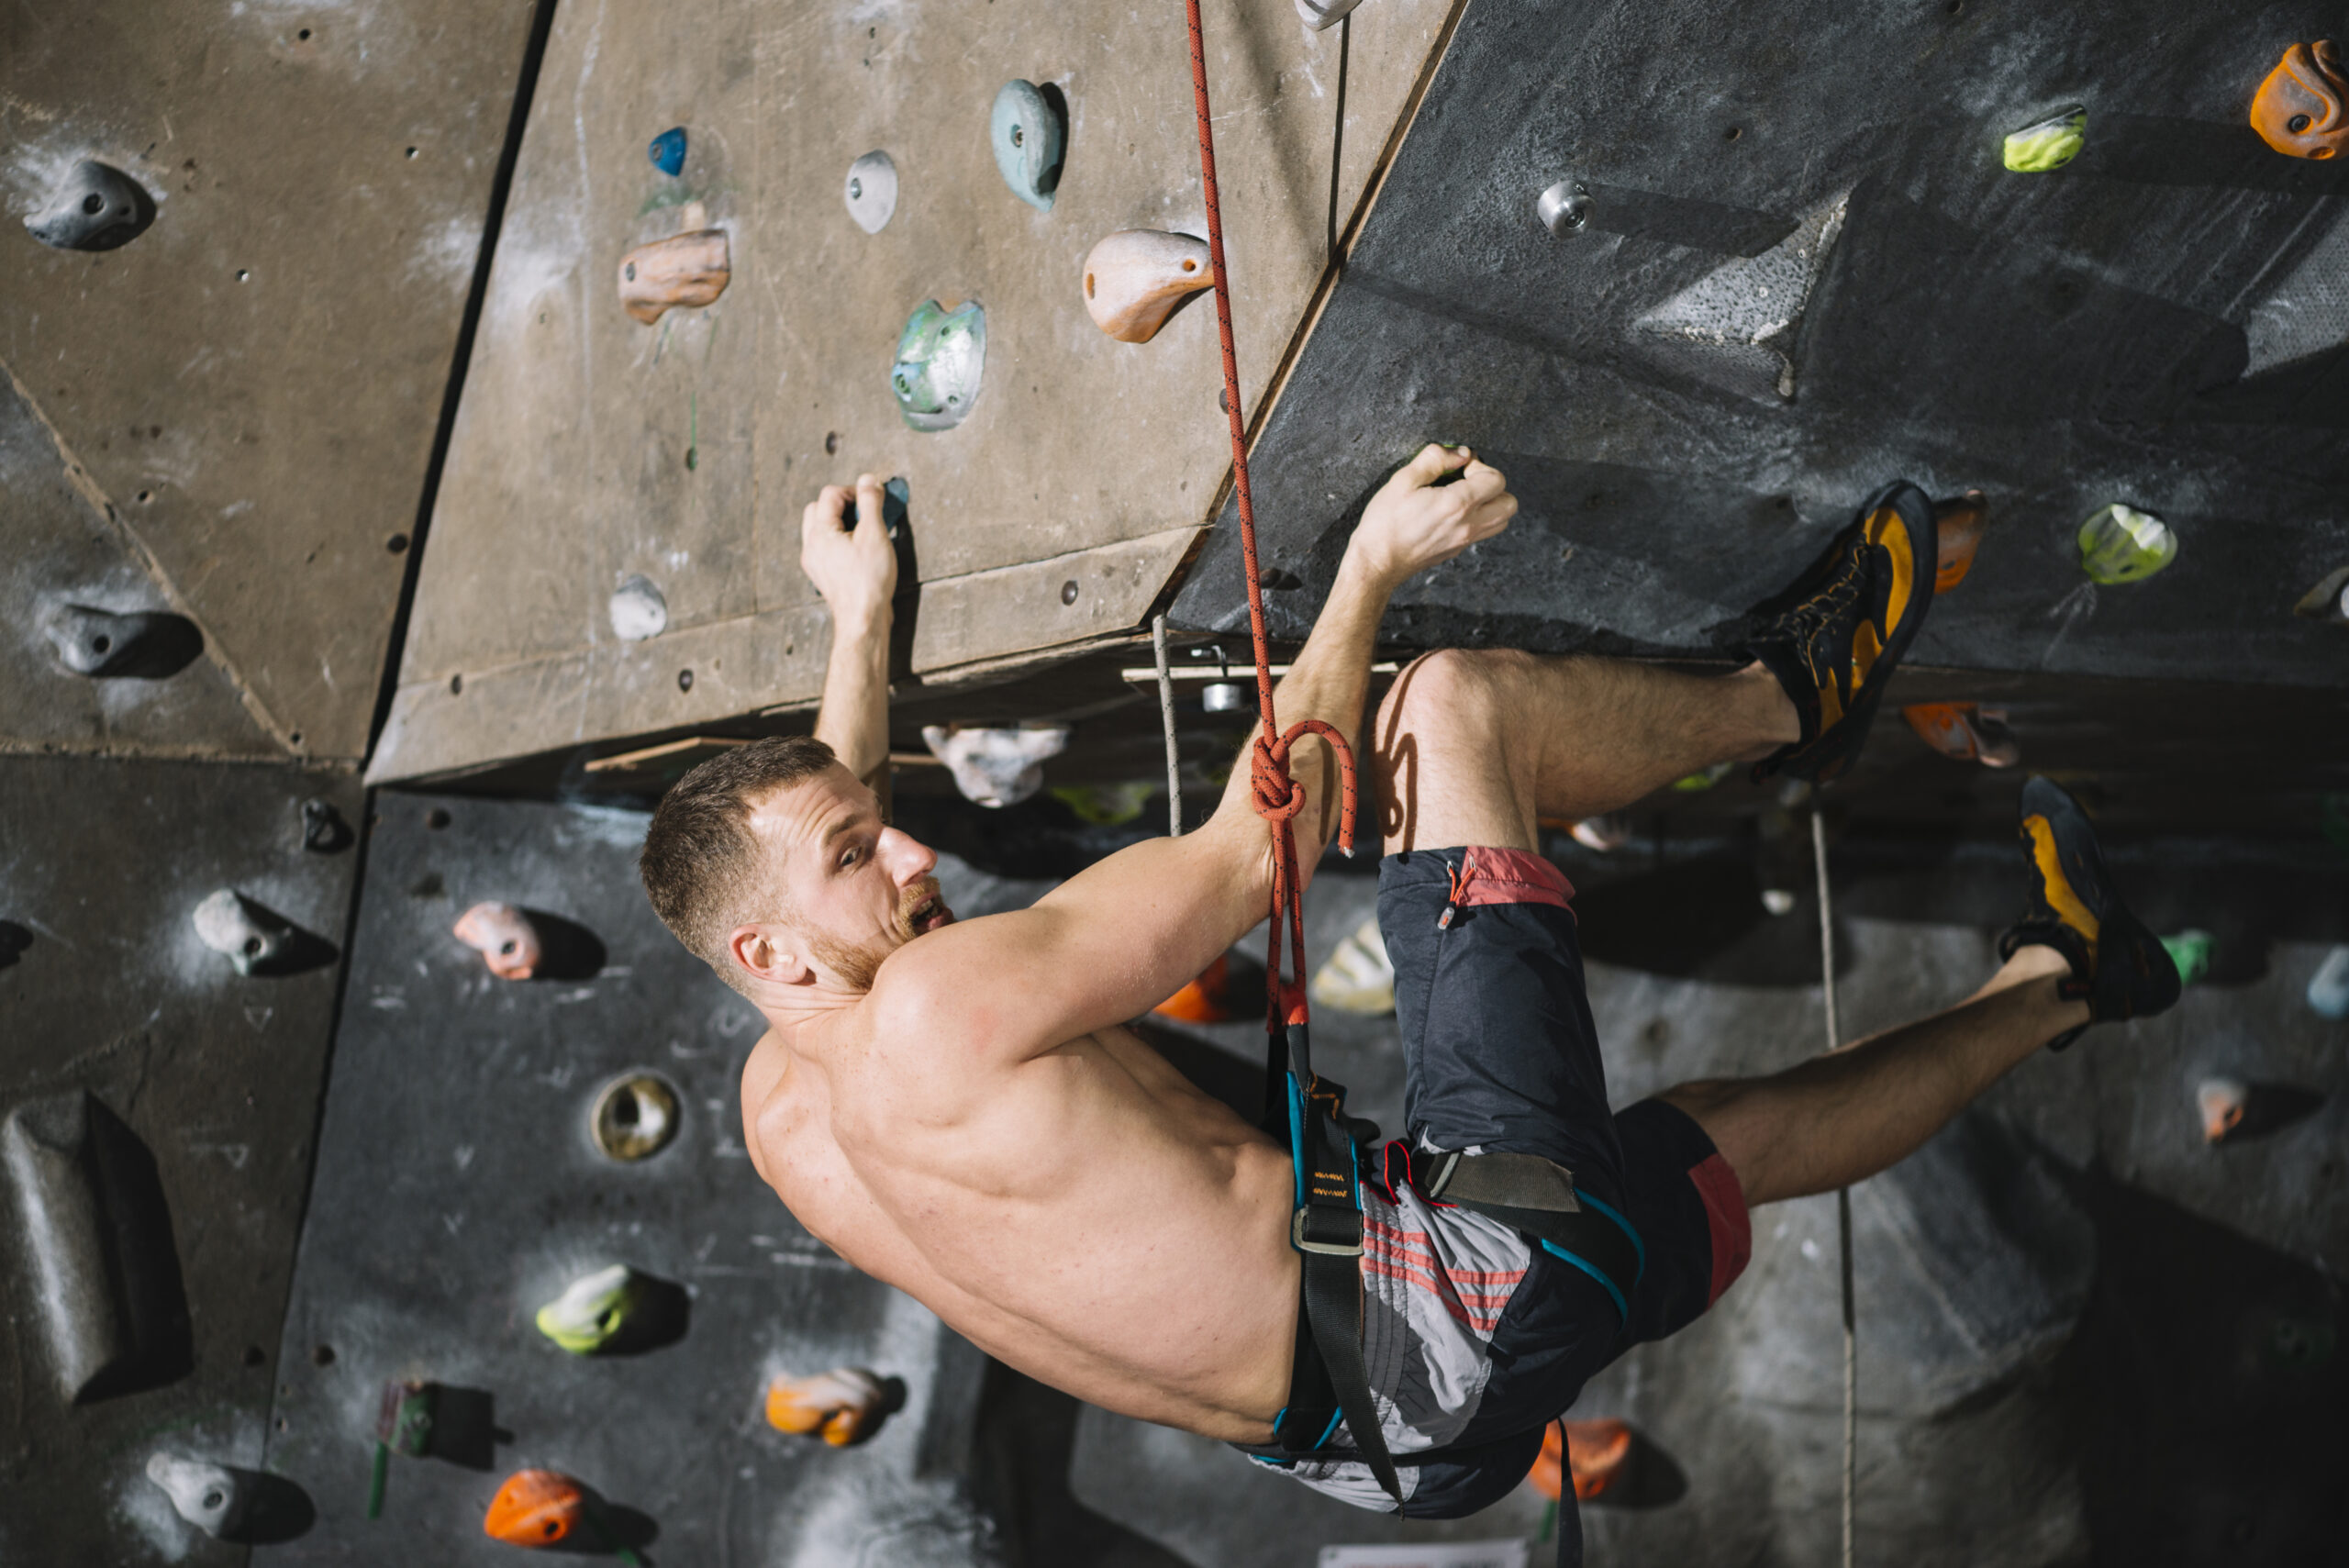 A climber practices rappelling on a low-risk surface, such as a boulder, while using proper safety equipment and techniques.